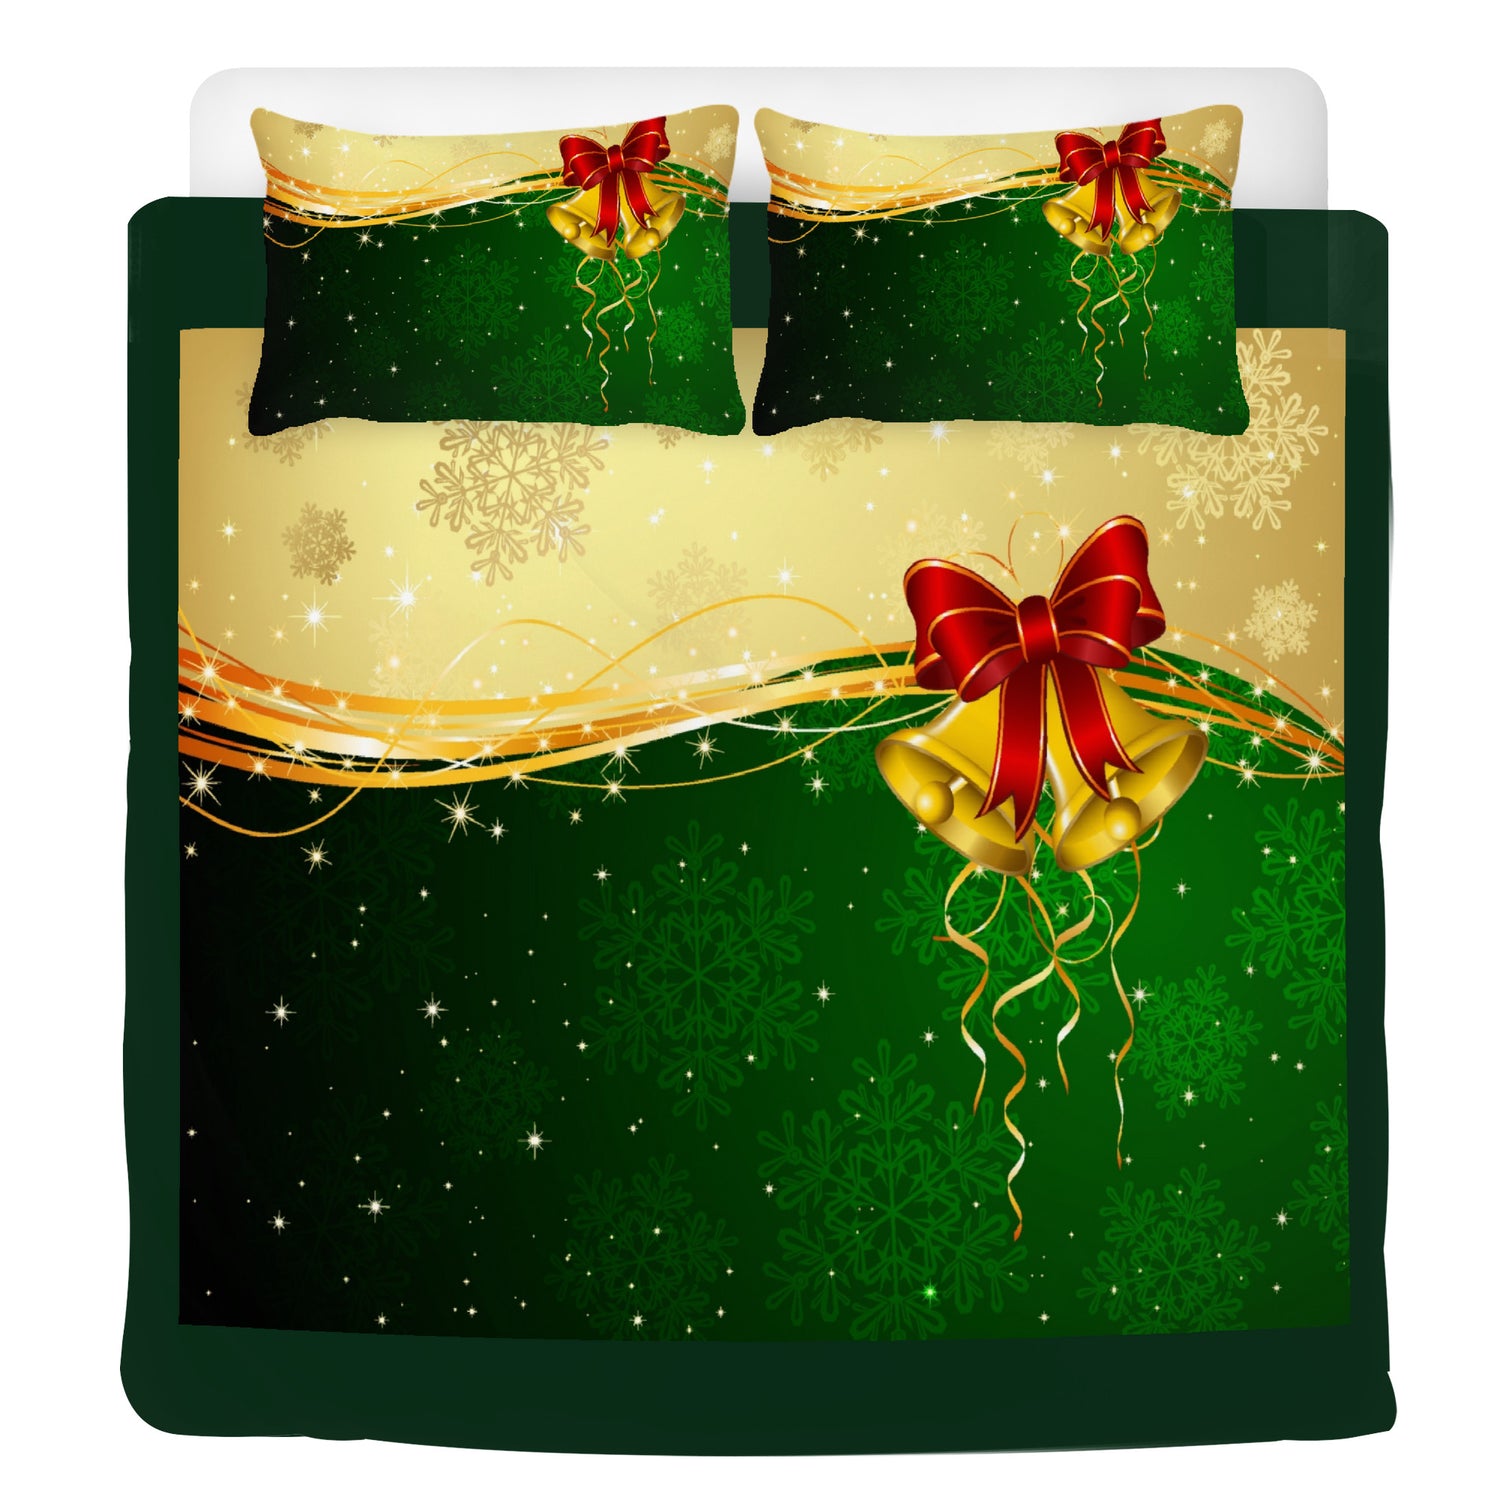 Beddings Jingle Bells Green Gold Home-clothes-jewelry